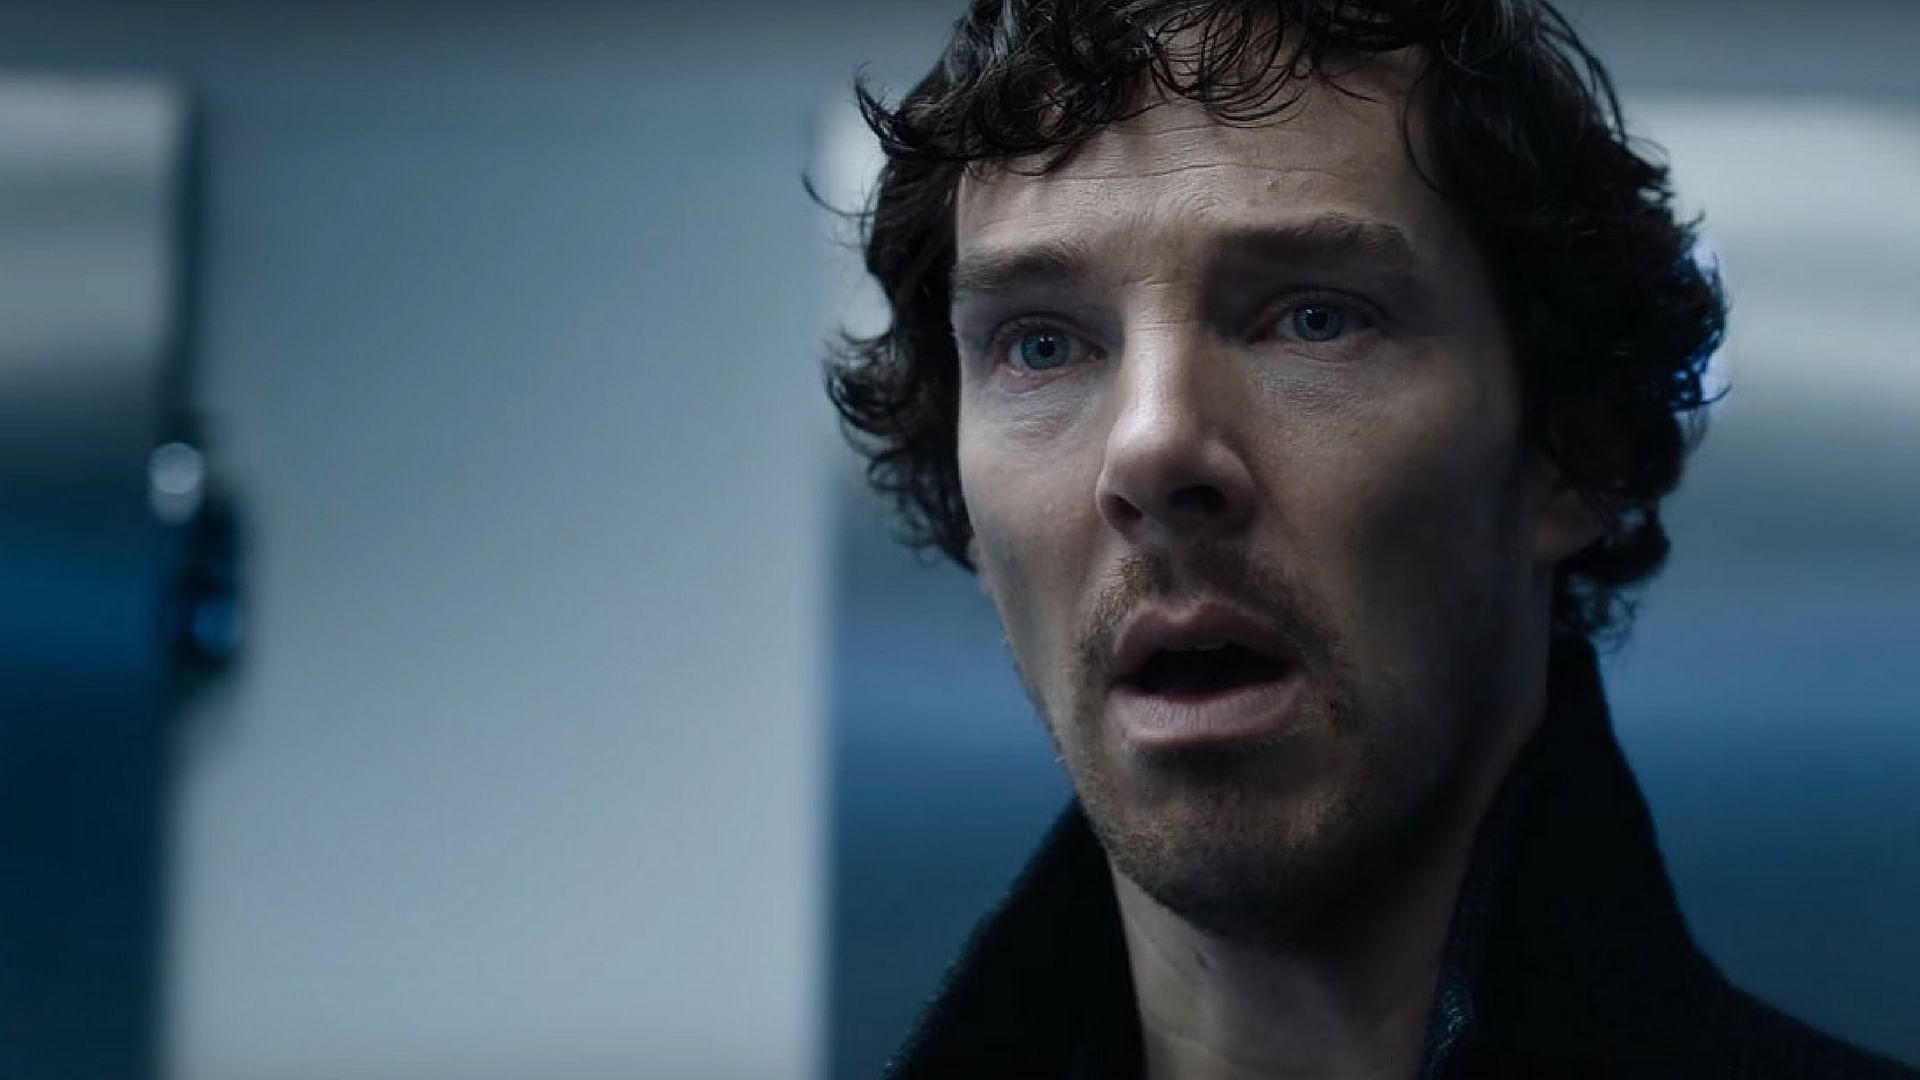 A still from the teaser of the latest series of <i>Sherlock. </i>(Photo courtesy: <a href="https://www.youtube.com/watch?v=qlcWFoNqZHc">YouTube/ Sherlock</a>)